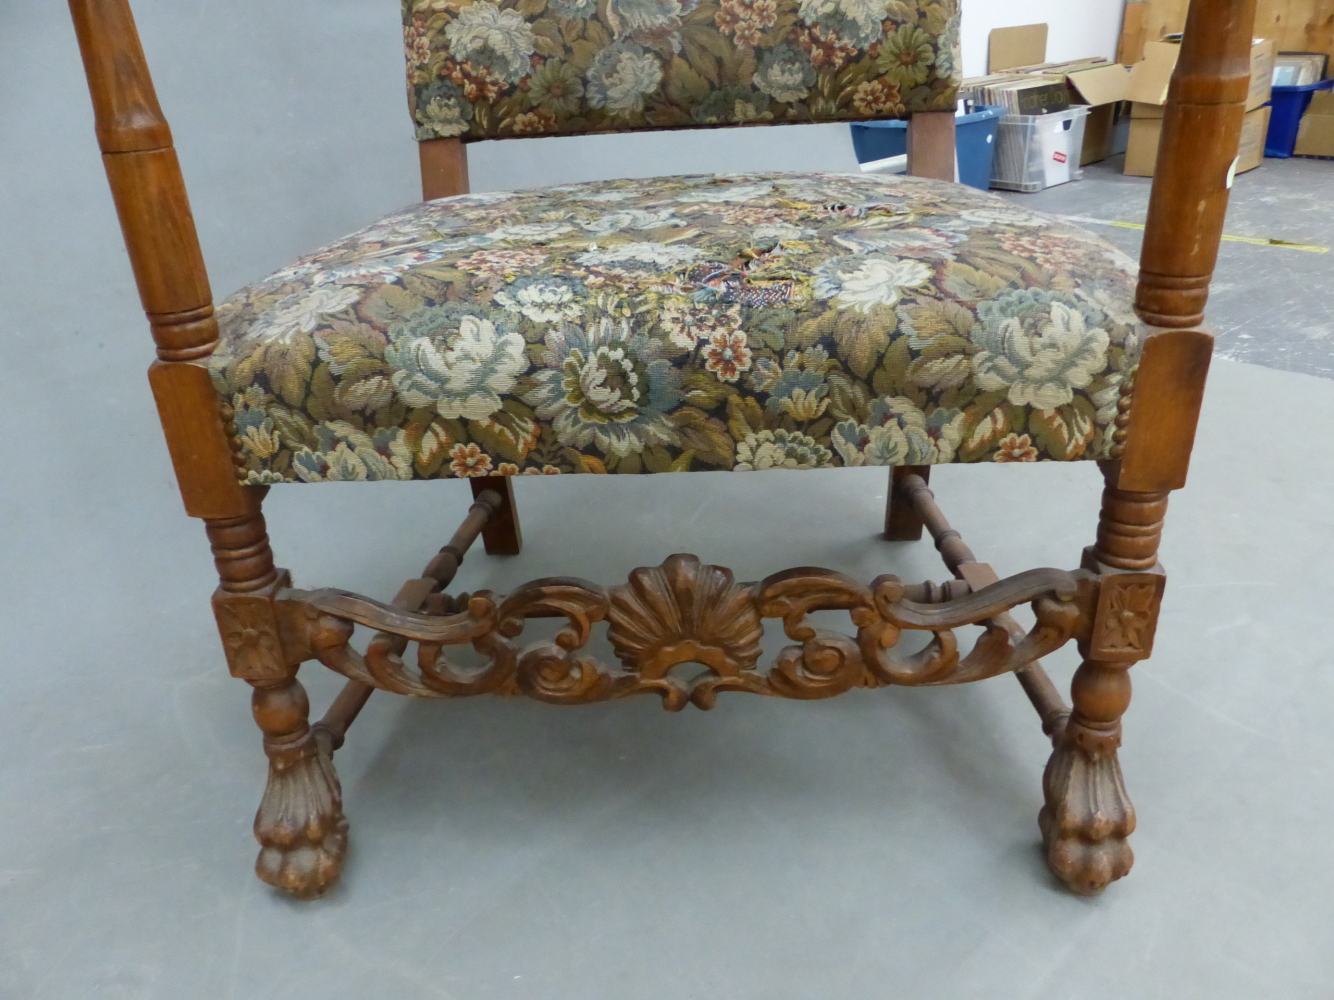 A CHARLES II STYLE BEECH WOOD ELBOW CHAIR WITH FLORAL UPHOLSTERED RECTANGULAR BACK AND SEAT - Image 7 of 9